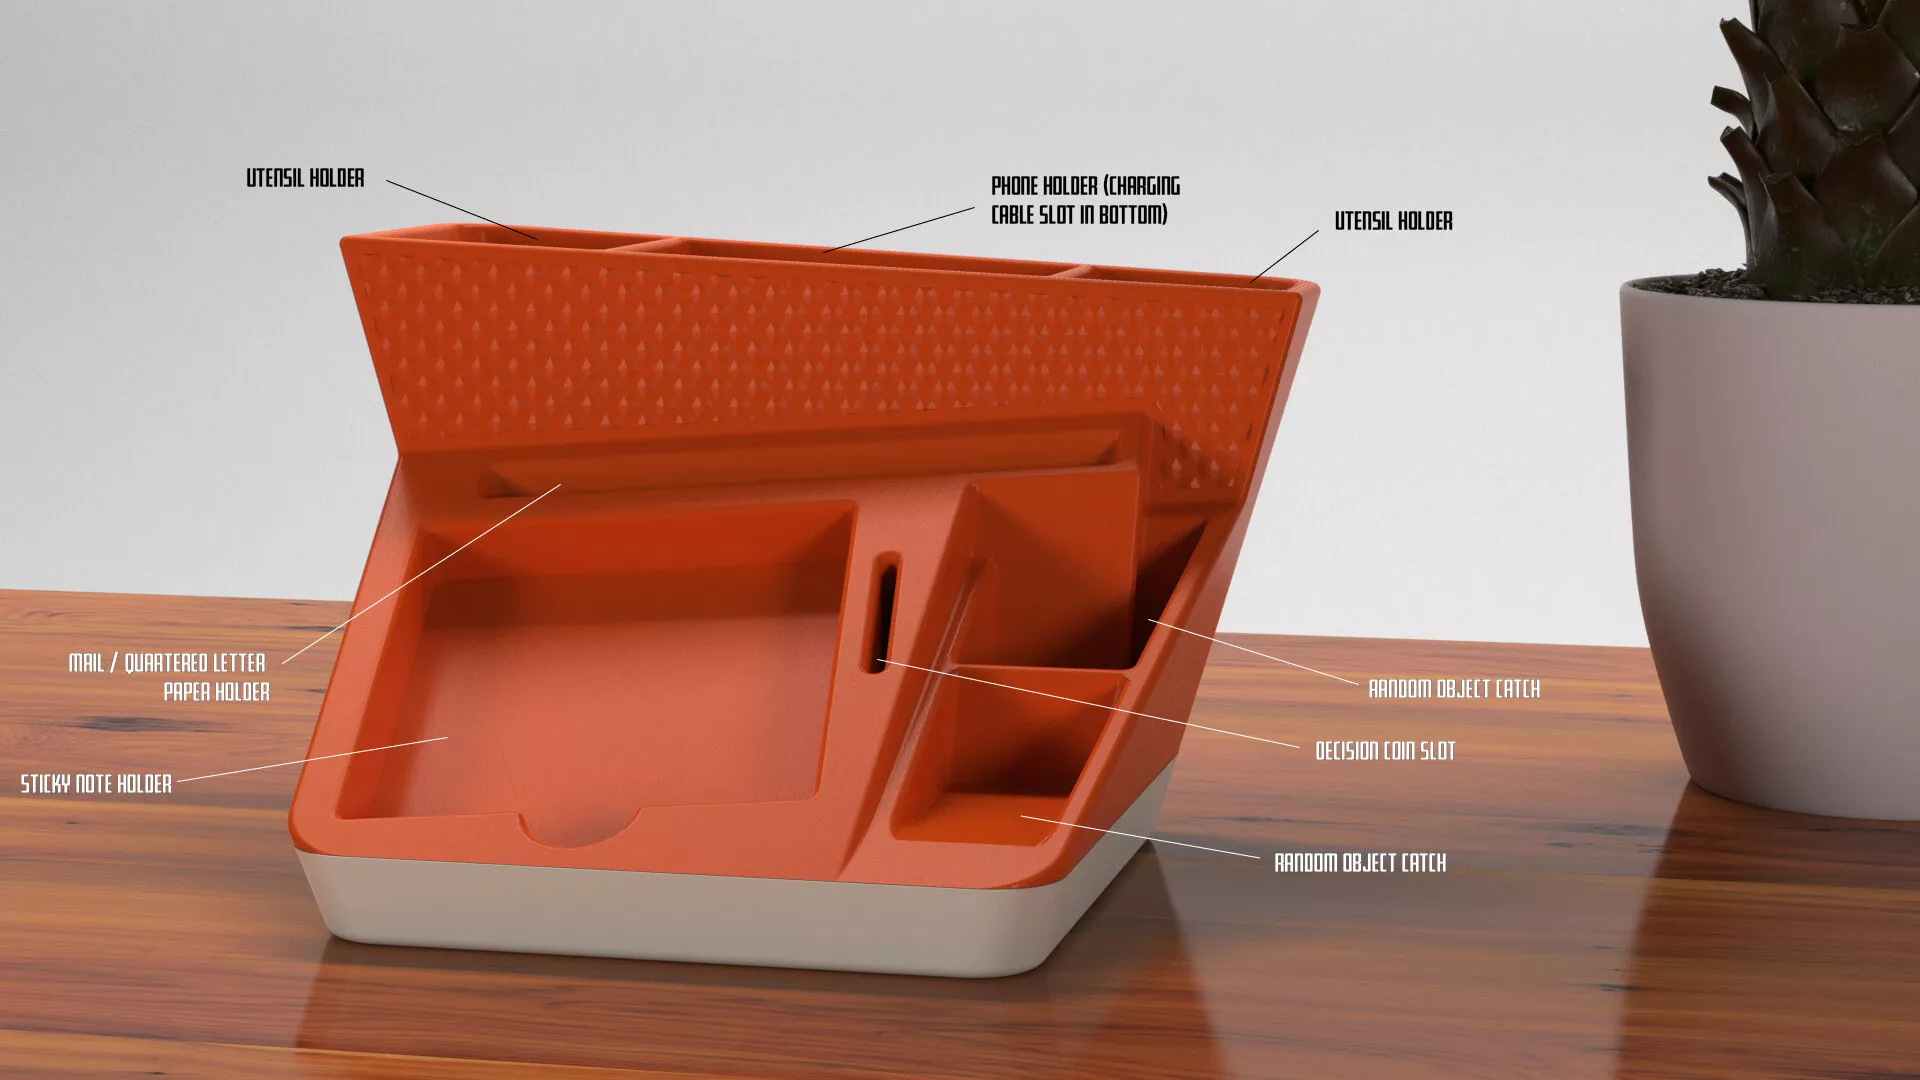 GoEngineer Community 3D printing design content winner, Bring Back the Cool Desk Organizer render detail annotated view